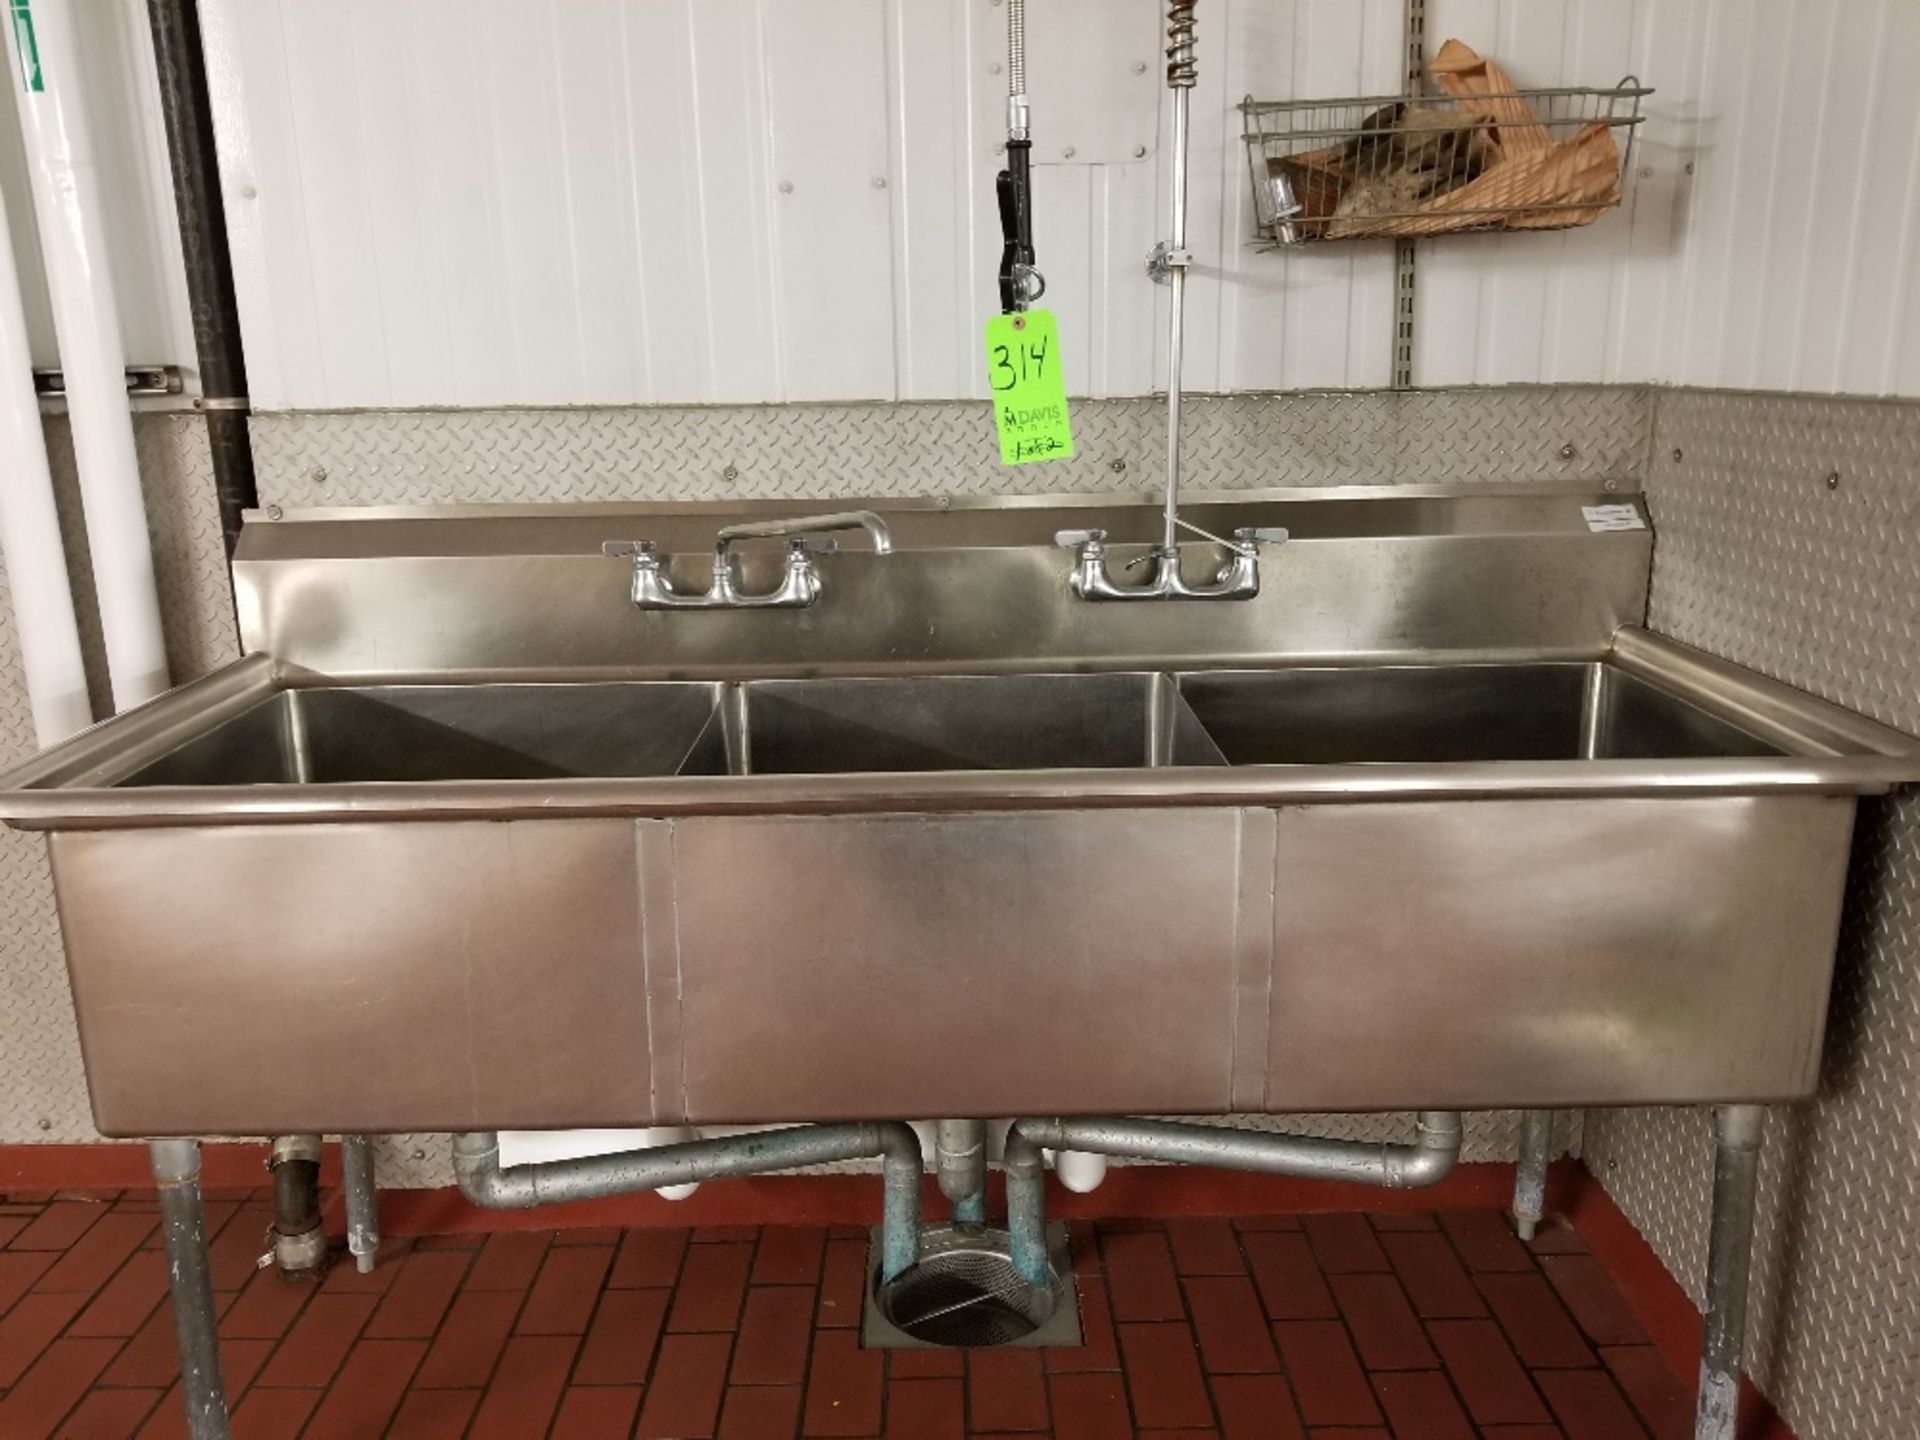 3-Bowl S/S Sinks with (2) Faucets and Sprayer, Overall Dimensions ~6 ft. L x 30" W and ~9 ft. L x